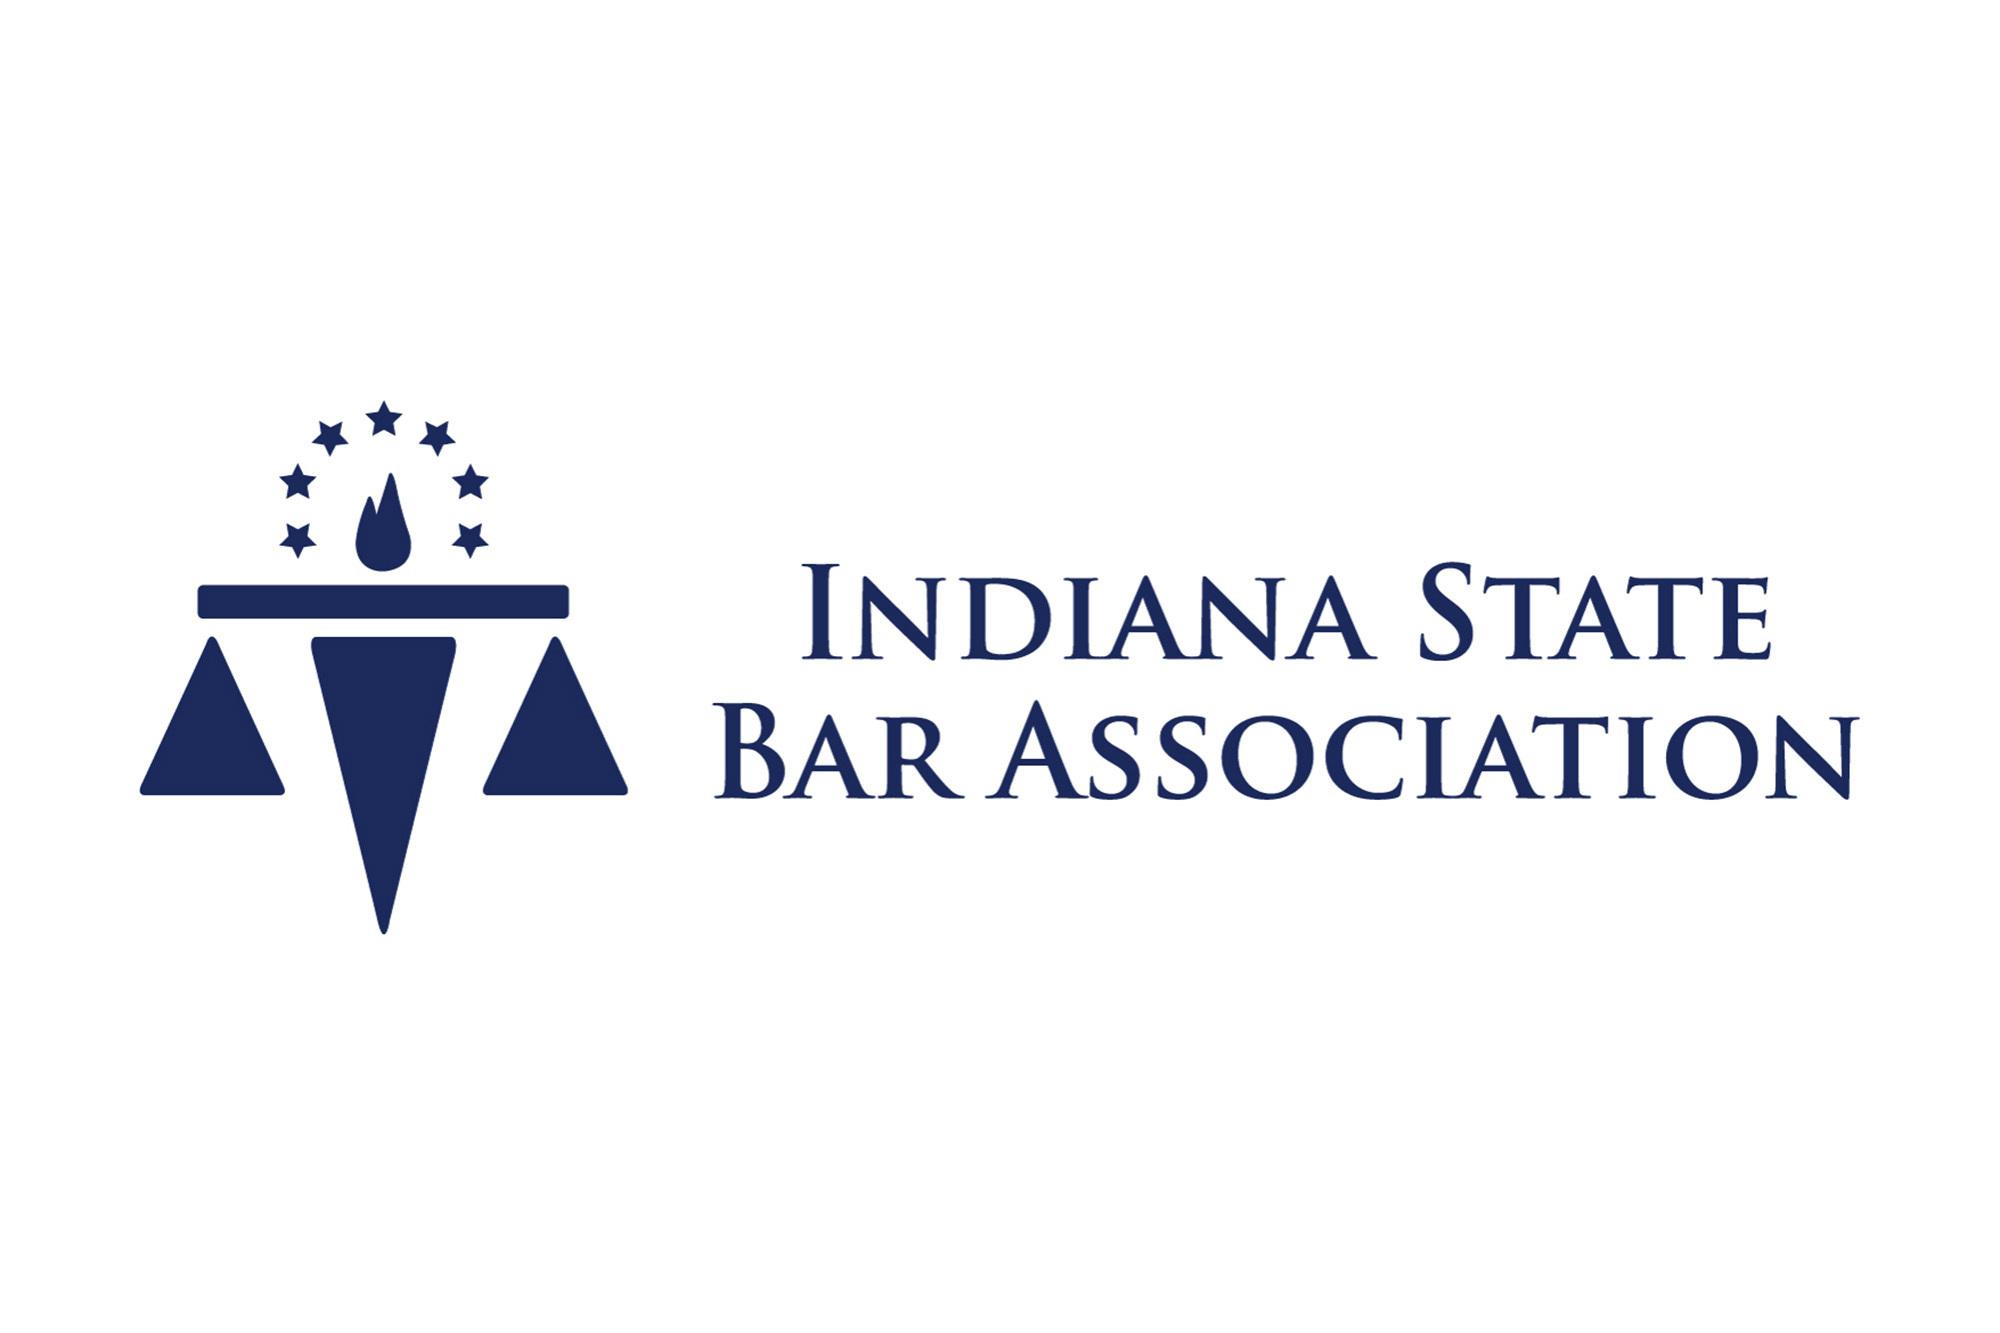 The Indiana State Bar Association is providing a new website for Hoosier attorneys, paralegals and staff to do pro bono work.